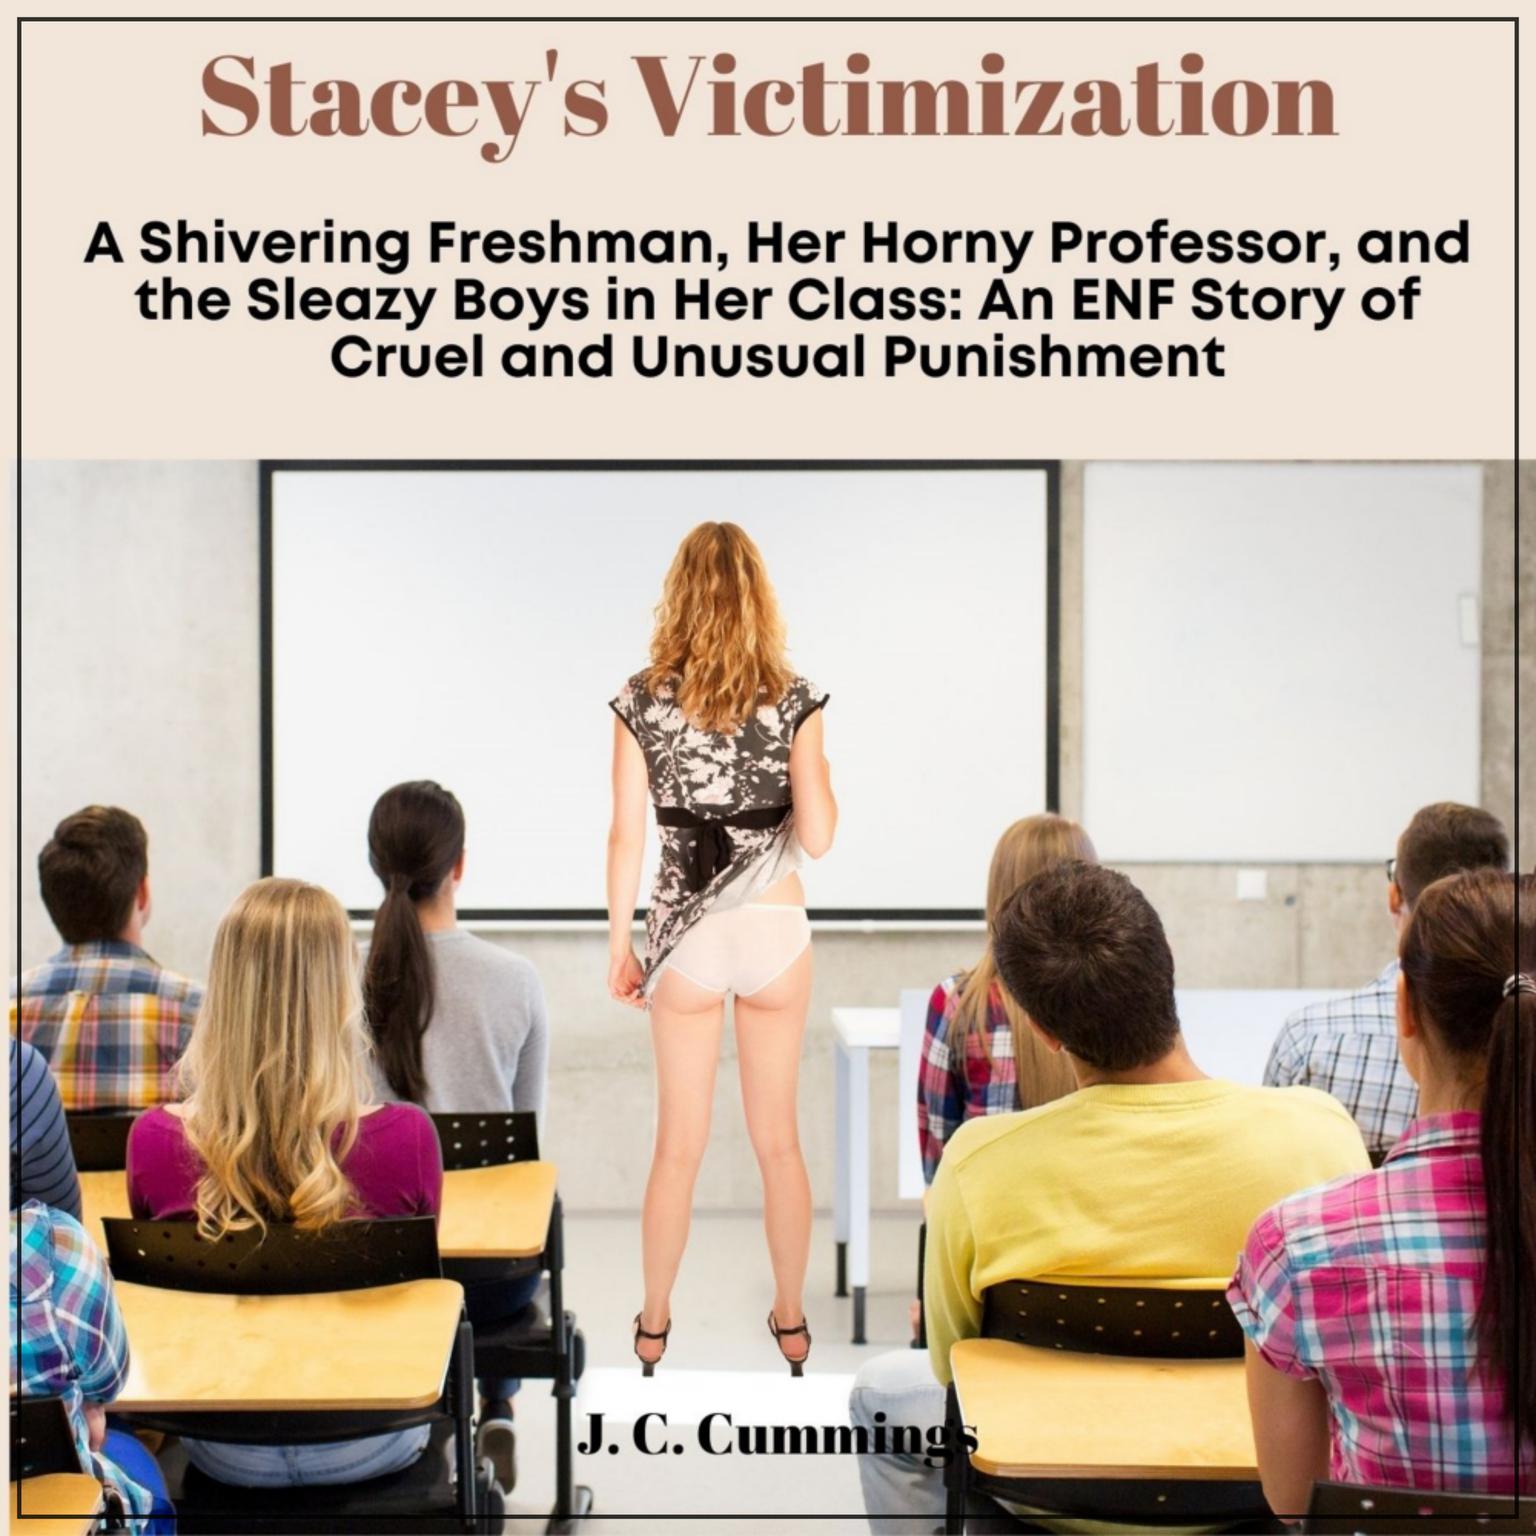 Stacey’s Victimization: A Shivering Freshman, Her Horny Professor, and the Sleazy Boys in Her Class Audiobook, by J.C. Cummings